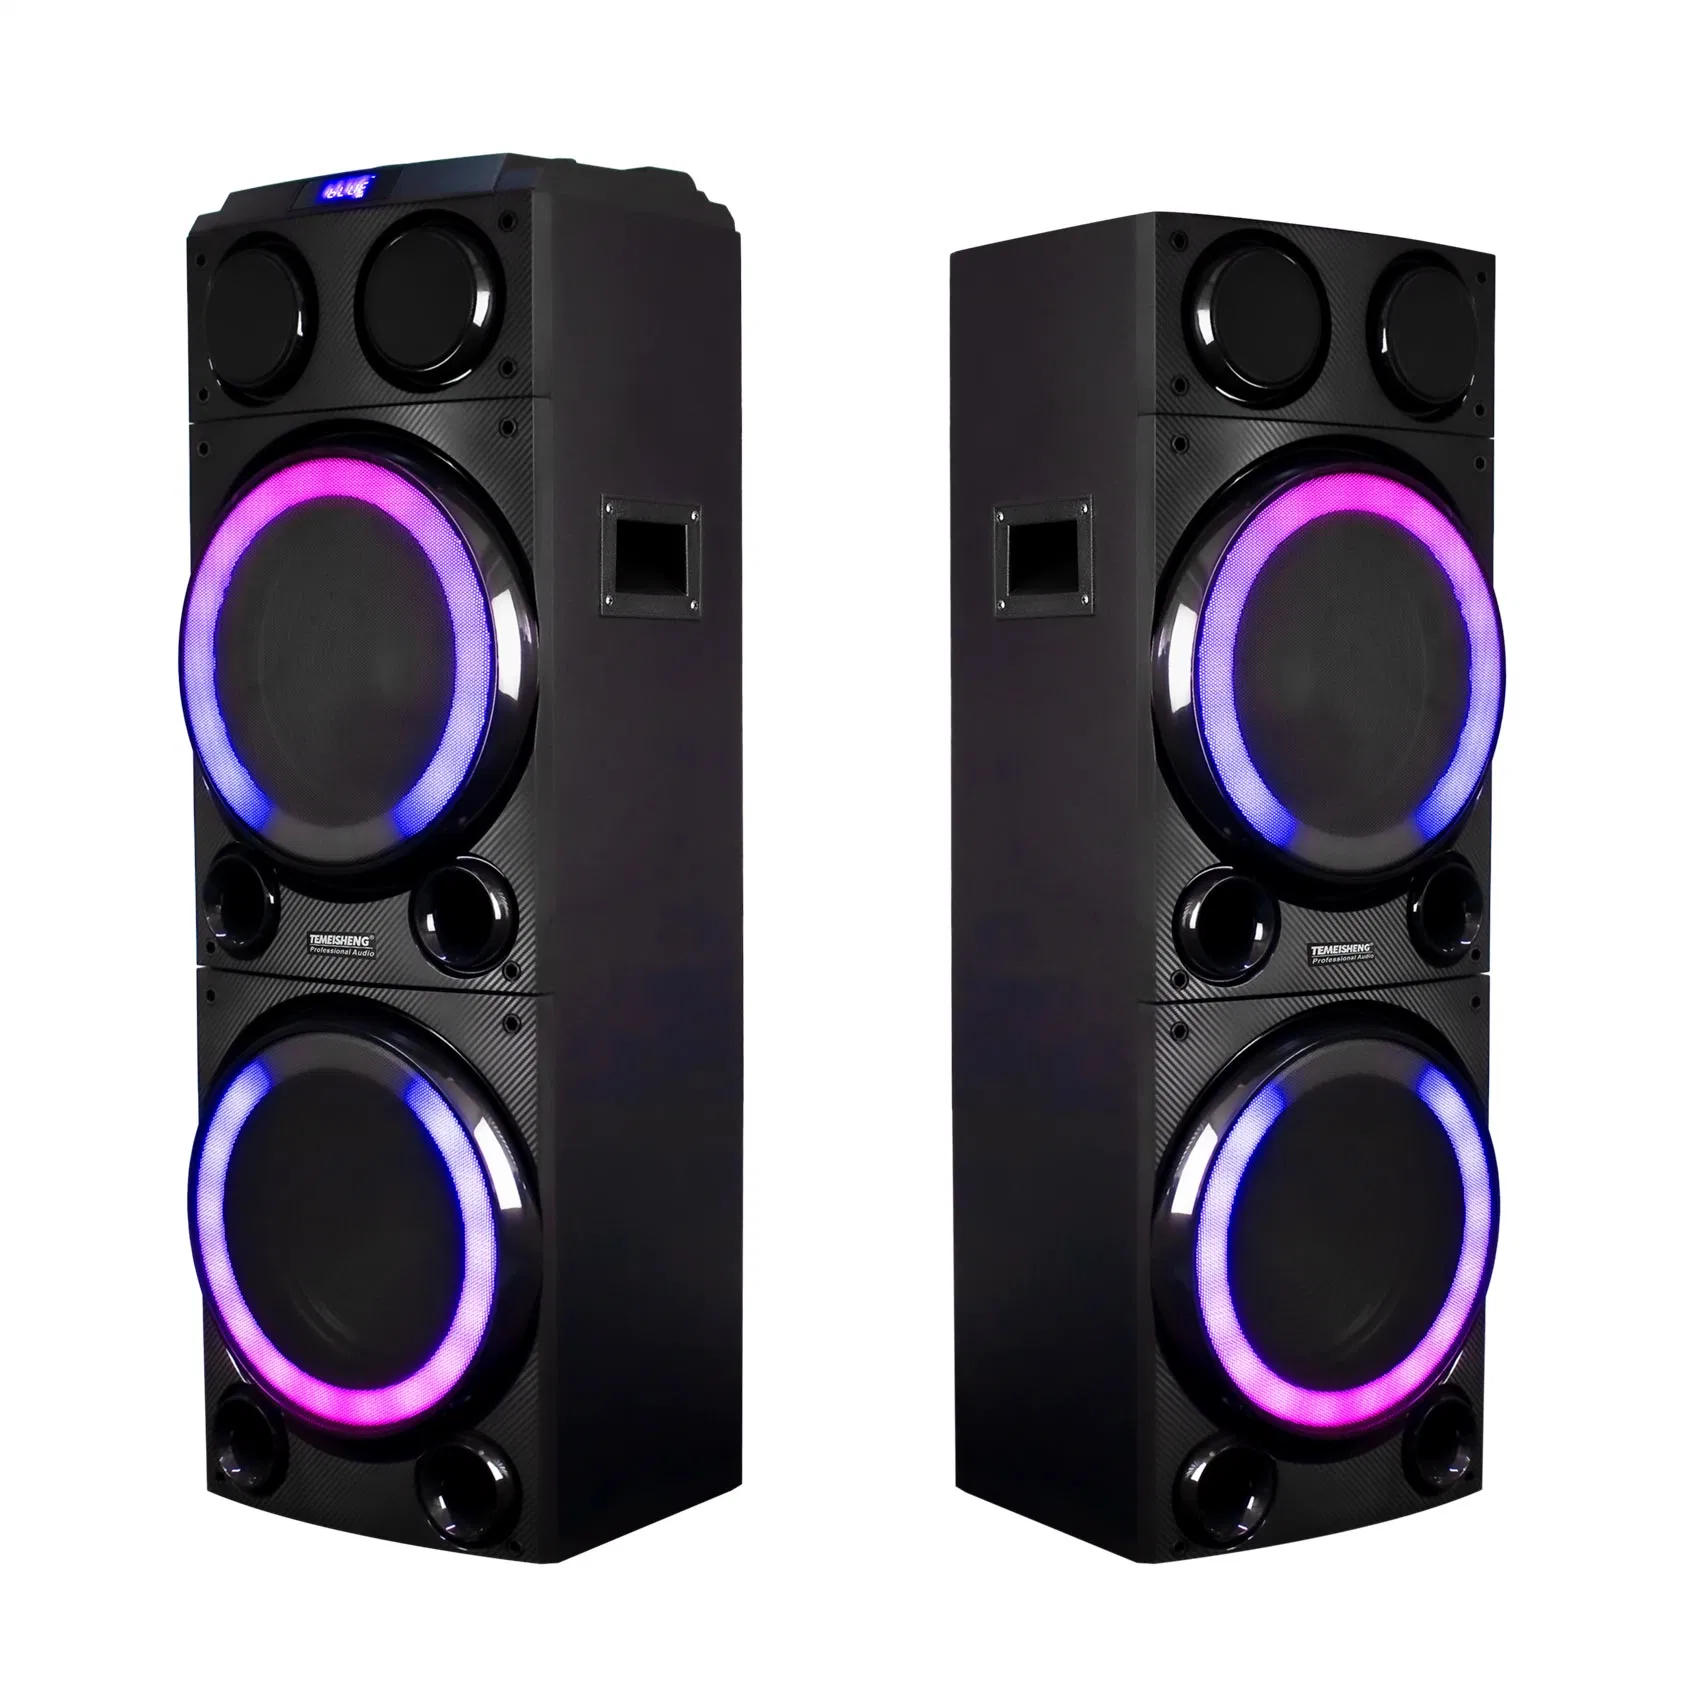 Hot-Selling Manufacturer 2.0 Active and Passive Karaoke Speaker with Light